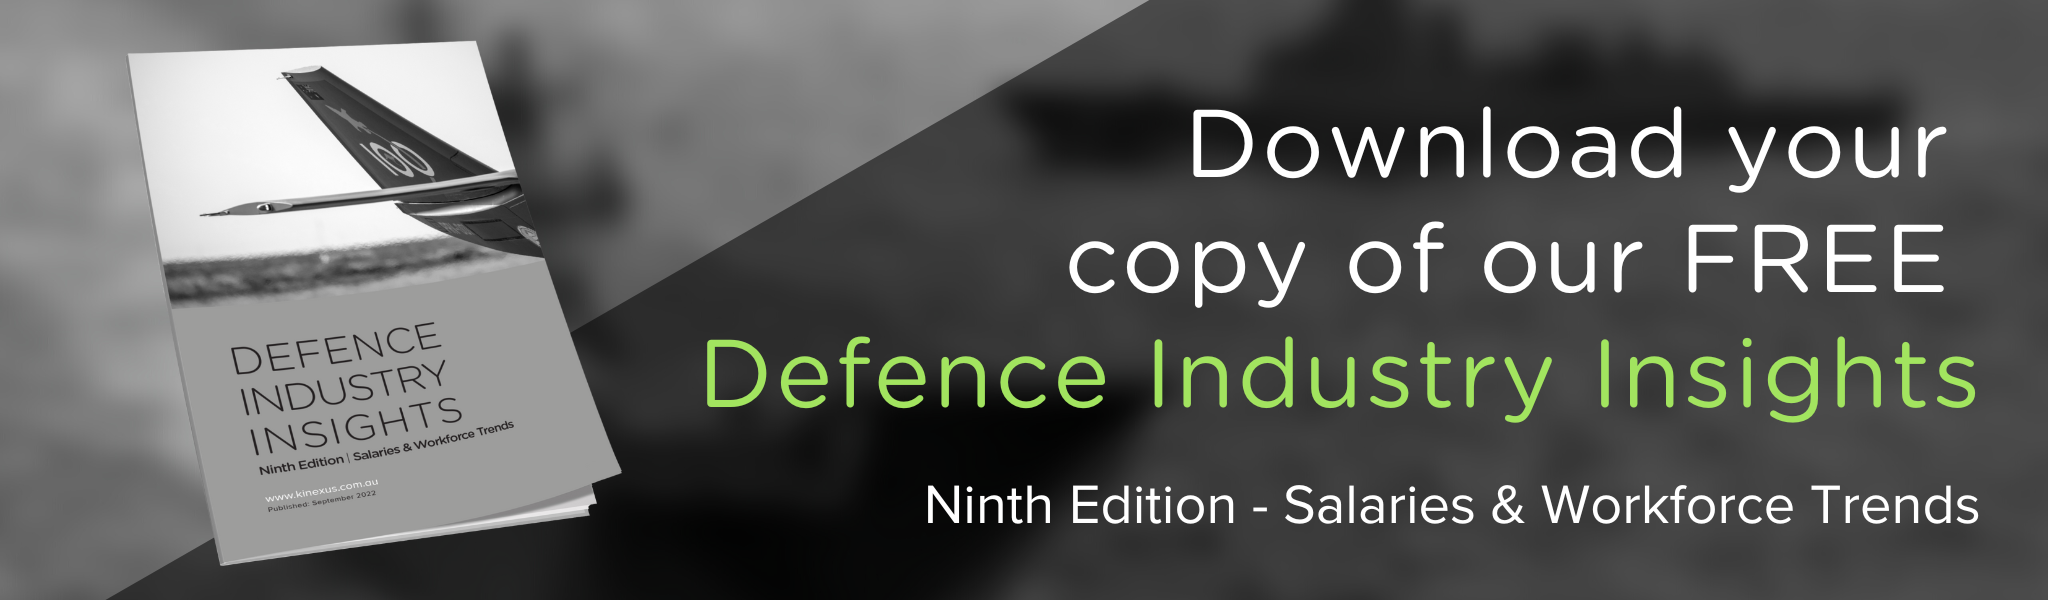 Download the Defence Industry Insights - Ninth Edition NOW